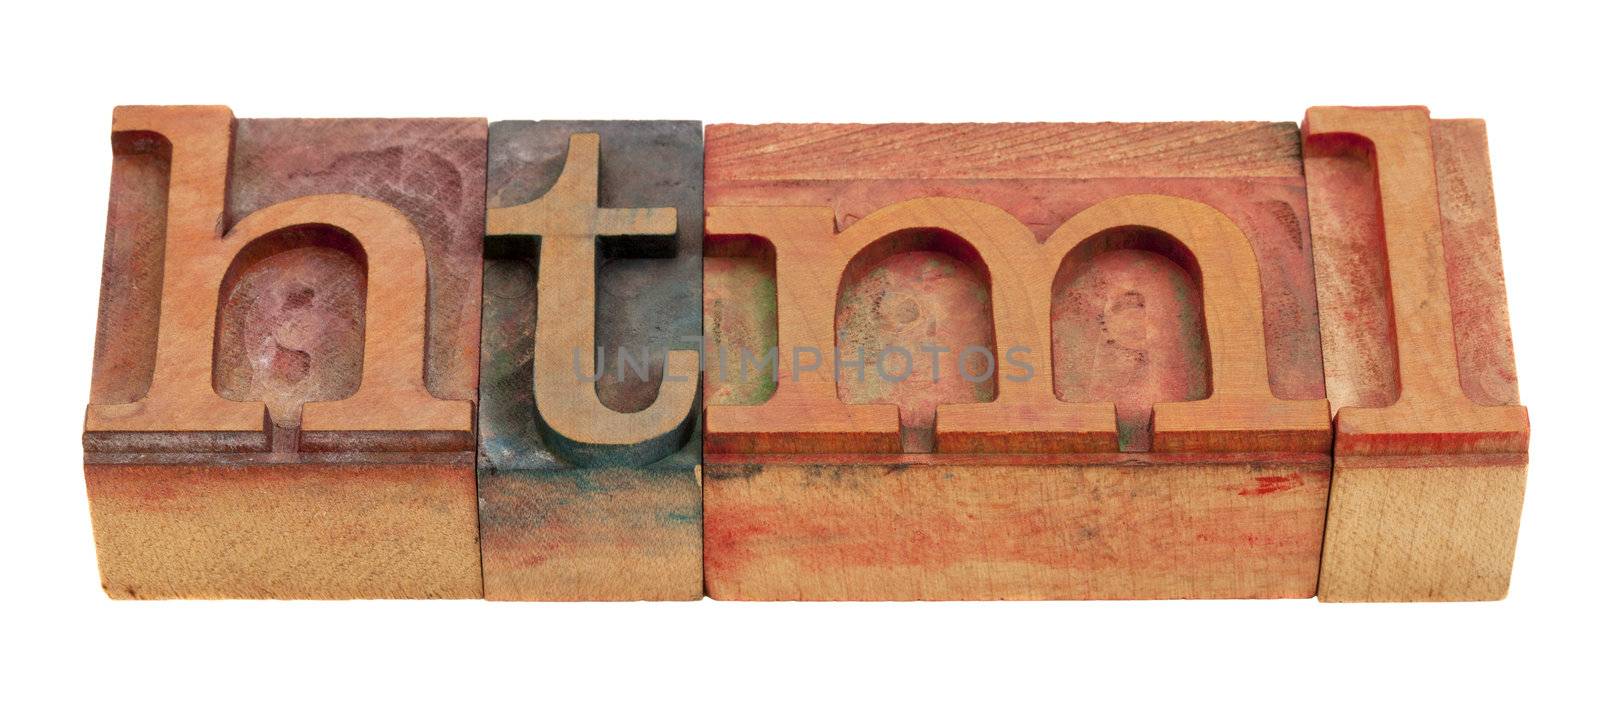 html (hyper text markup language) -  word in vintage wooden letterpress printing blocks isolated on white